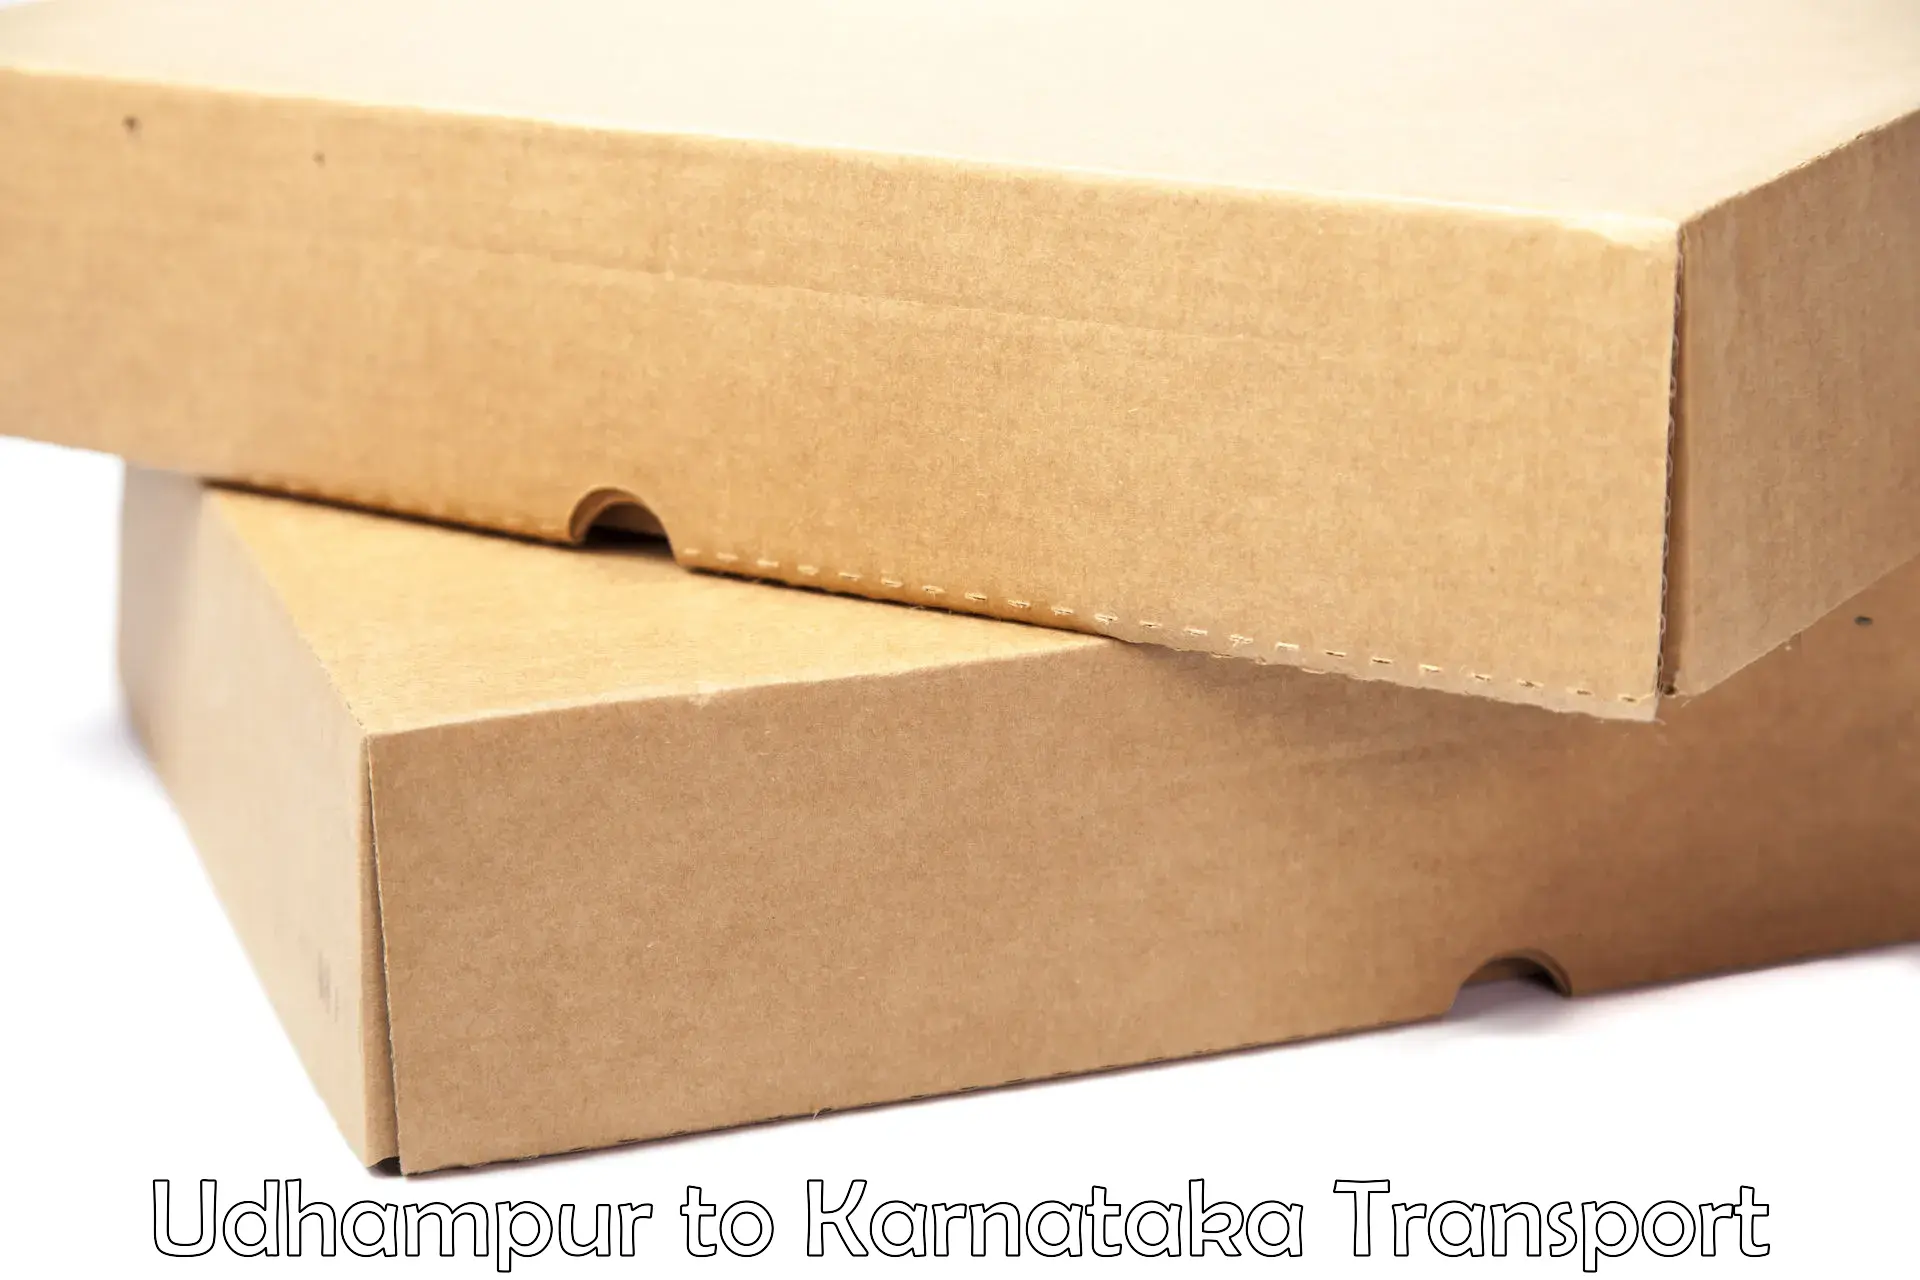 Truck transport companies in India Udhampur to Mangalore